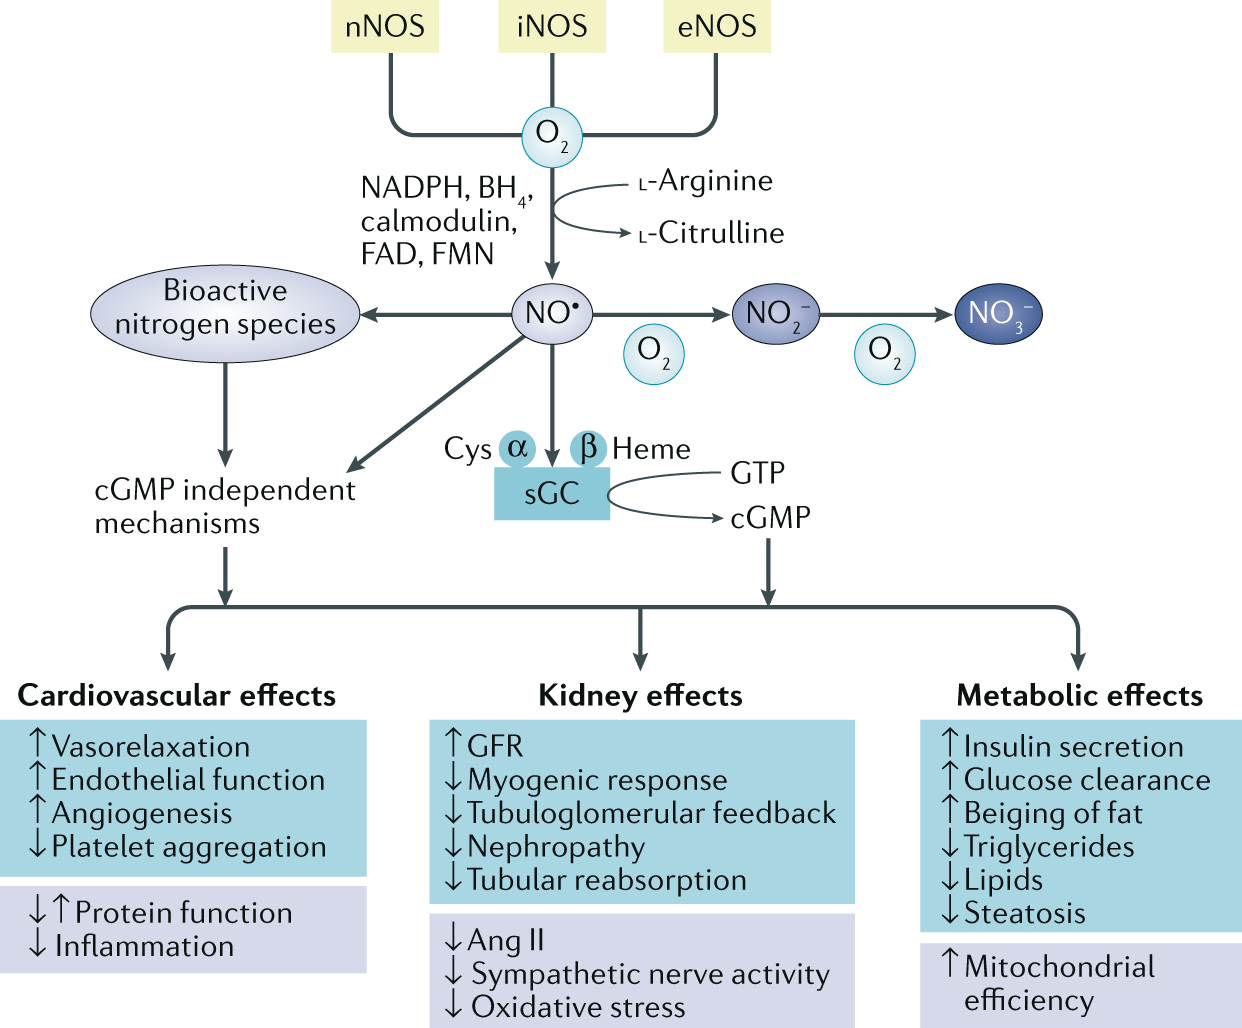 Nitric oxide signalling in kidney regulation and cardiometabolic health |  Nature Reviews Nephrology